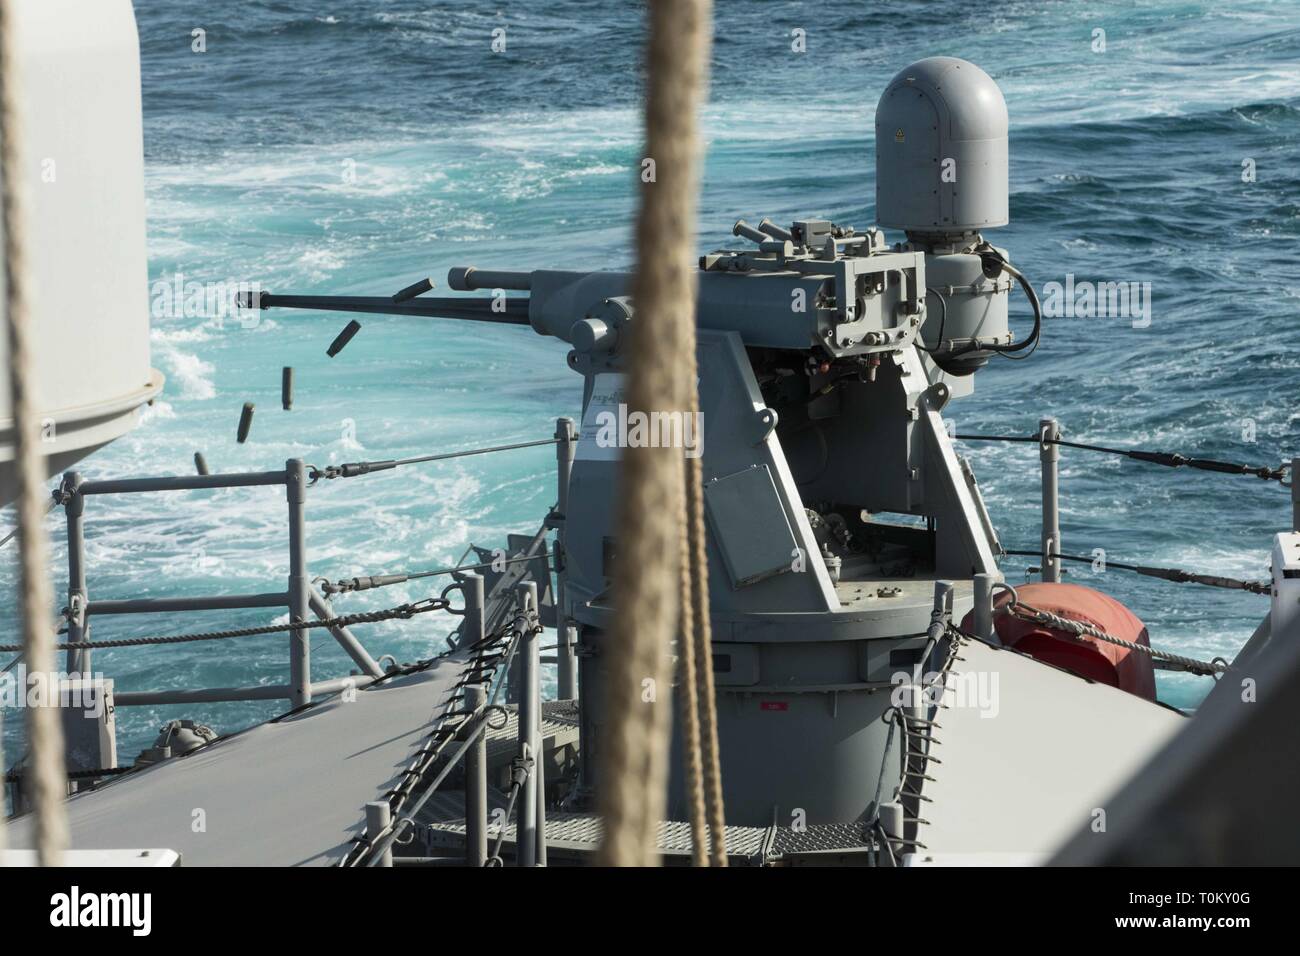 ARABIAN GULF (March 18, 2019) The Mark 38 .25mm machine gun fires toward a floating target during a gunnery exercise aboard the Cyclone-class coastal patrol ship USS Thunderbolt (PC 12). Thunderbolt is forward deployed to the U.S. 5th Fleet area of operations to ensure maritime stability and security in the Central Region, connecting the Mediterranean and the Pacific through the western Indian Ocean and three strategic choke points.  (U.S. Army photo by 1st Lt. Nicholas Zehrung/ Released) Stock Photo